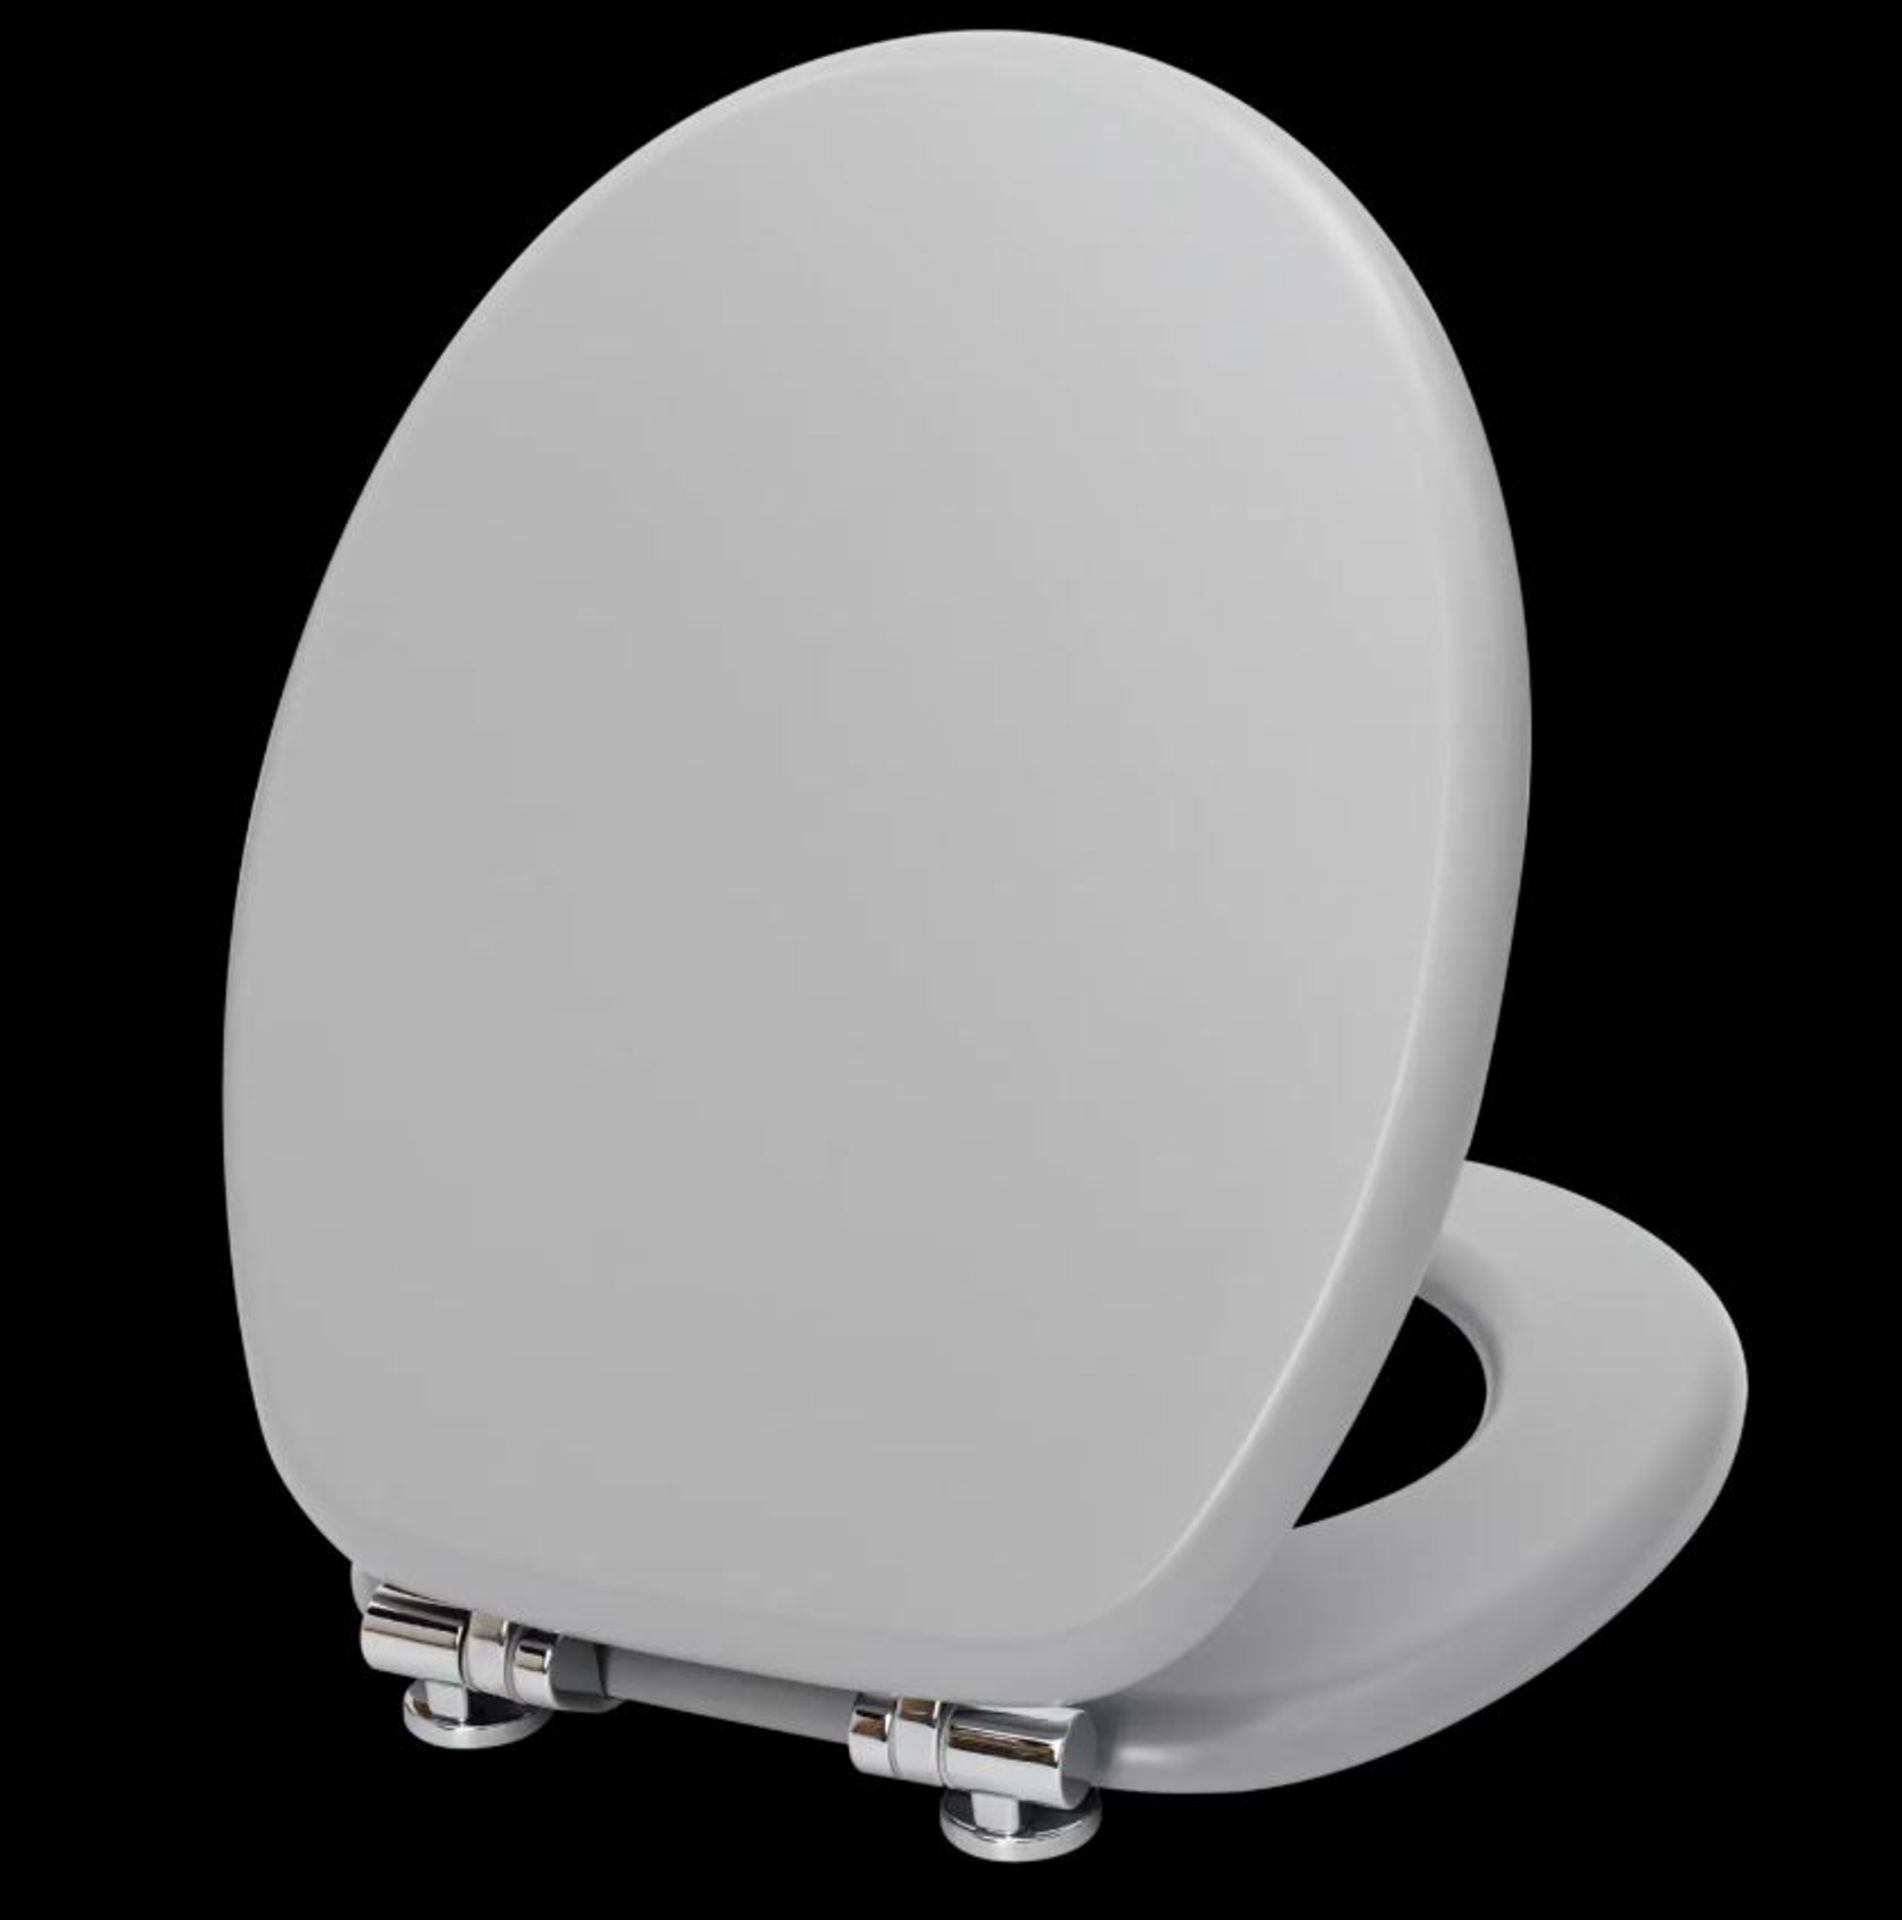 (13B) 4x Grey Wooden Soft Close Toilet Seat RRP £24 Each. (New Items, Damaged Packaging).